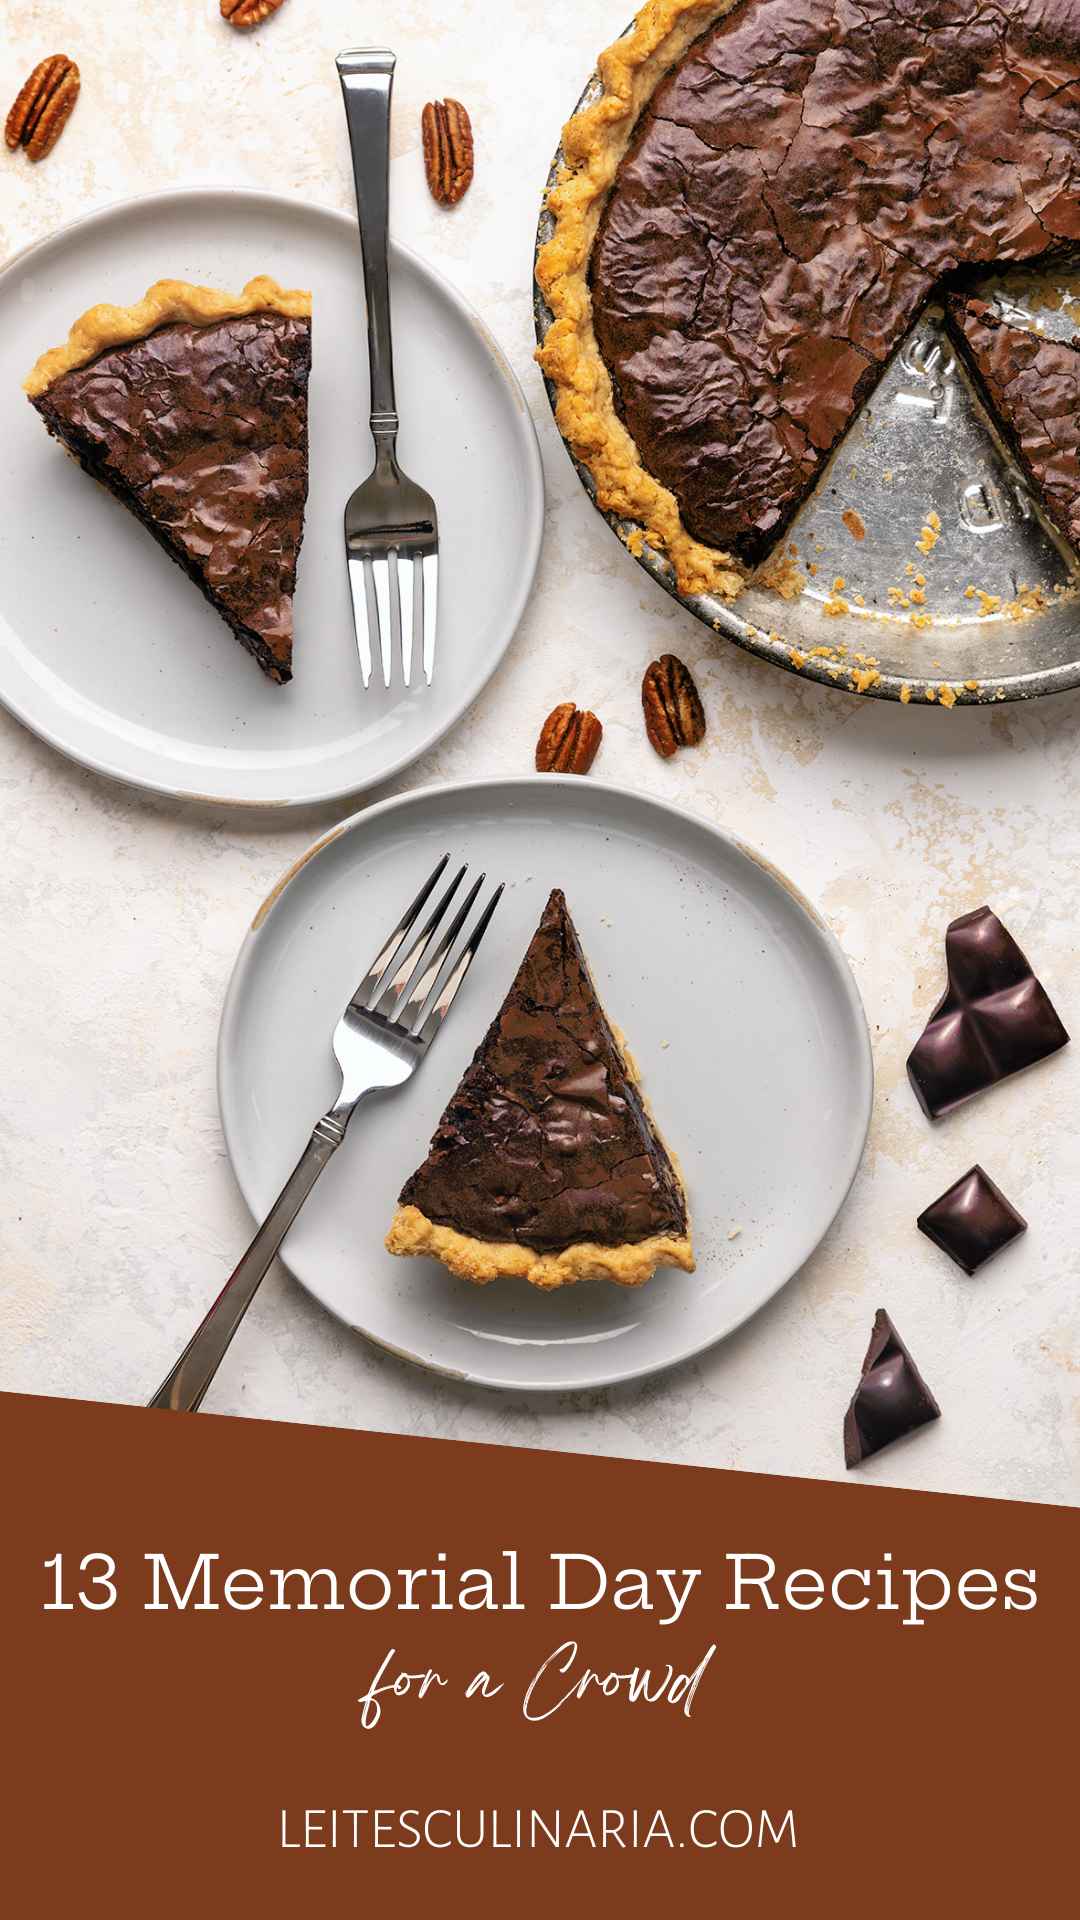 A brownie pie with two slices cut from it on plates nearby.